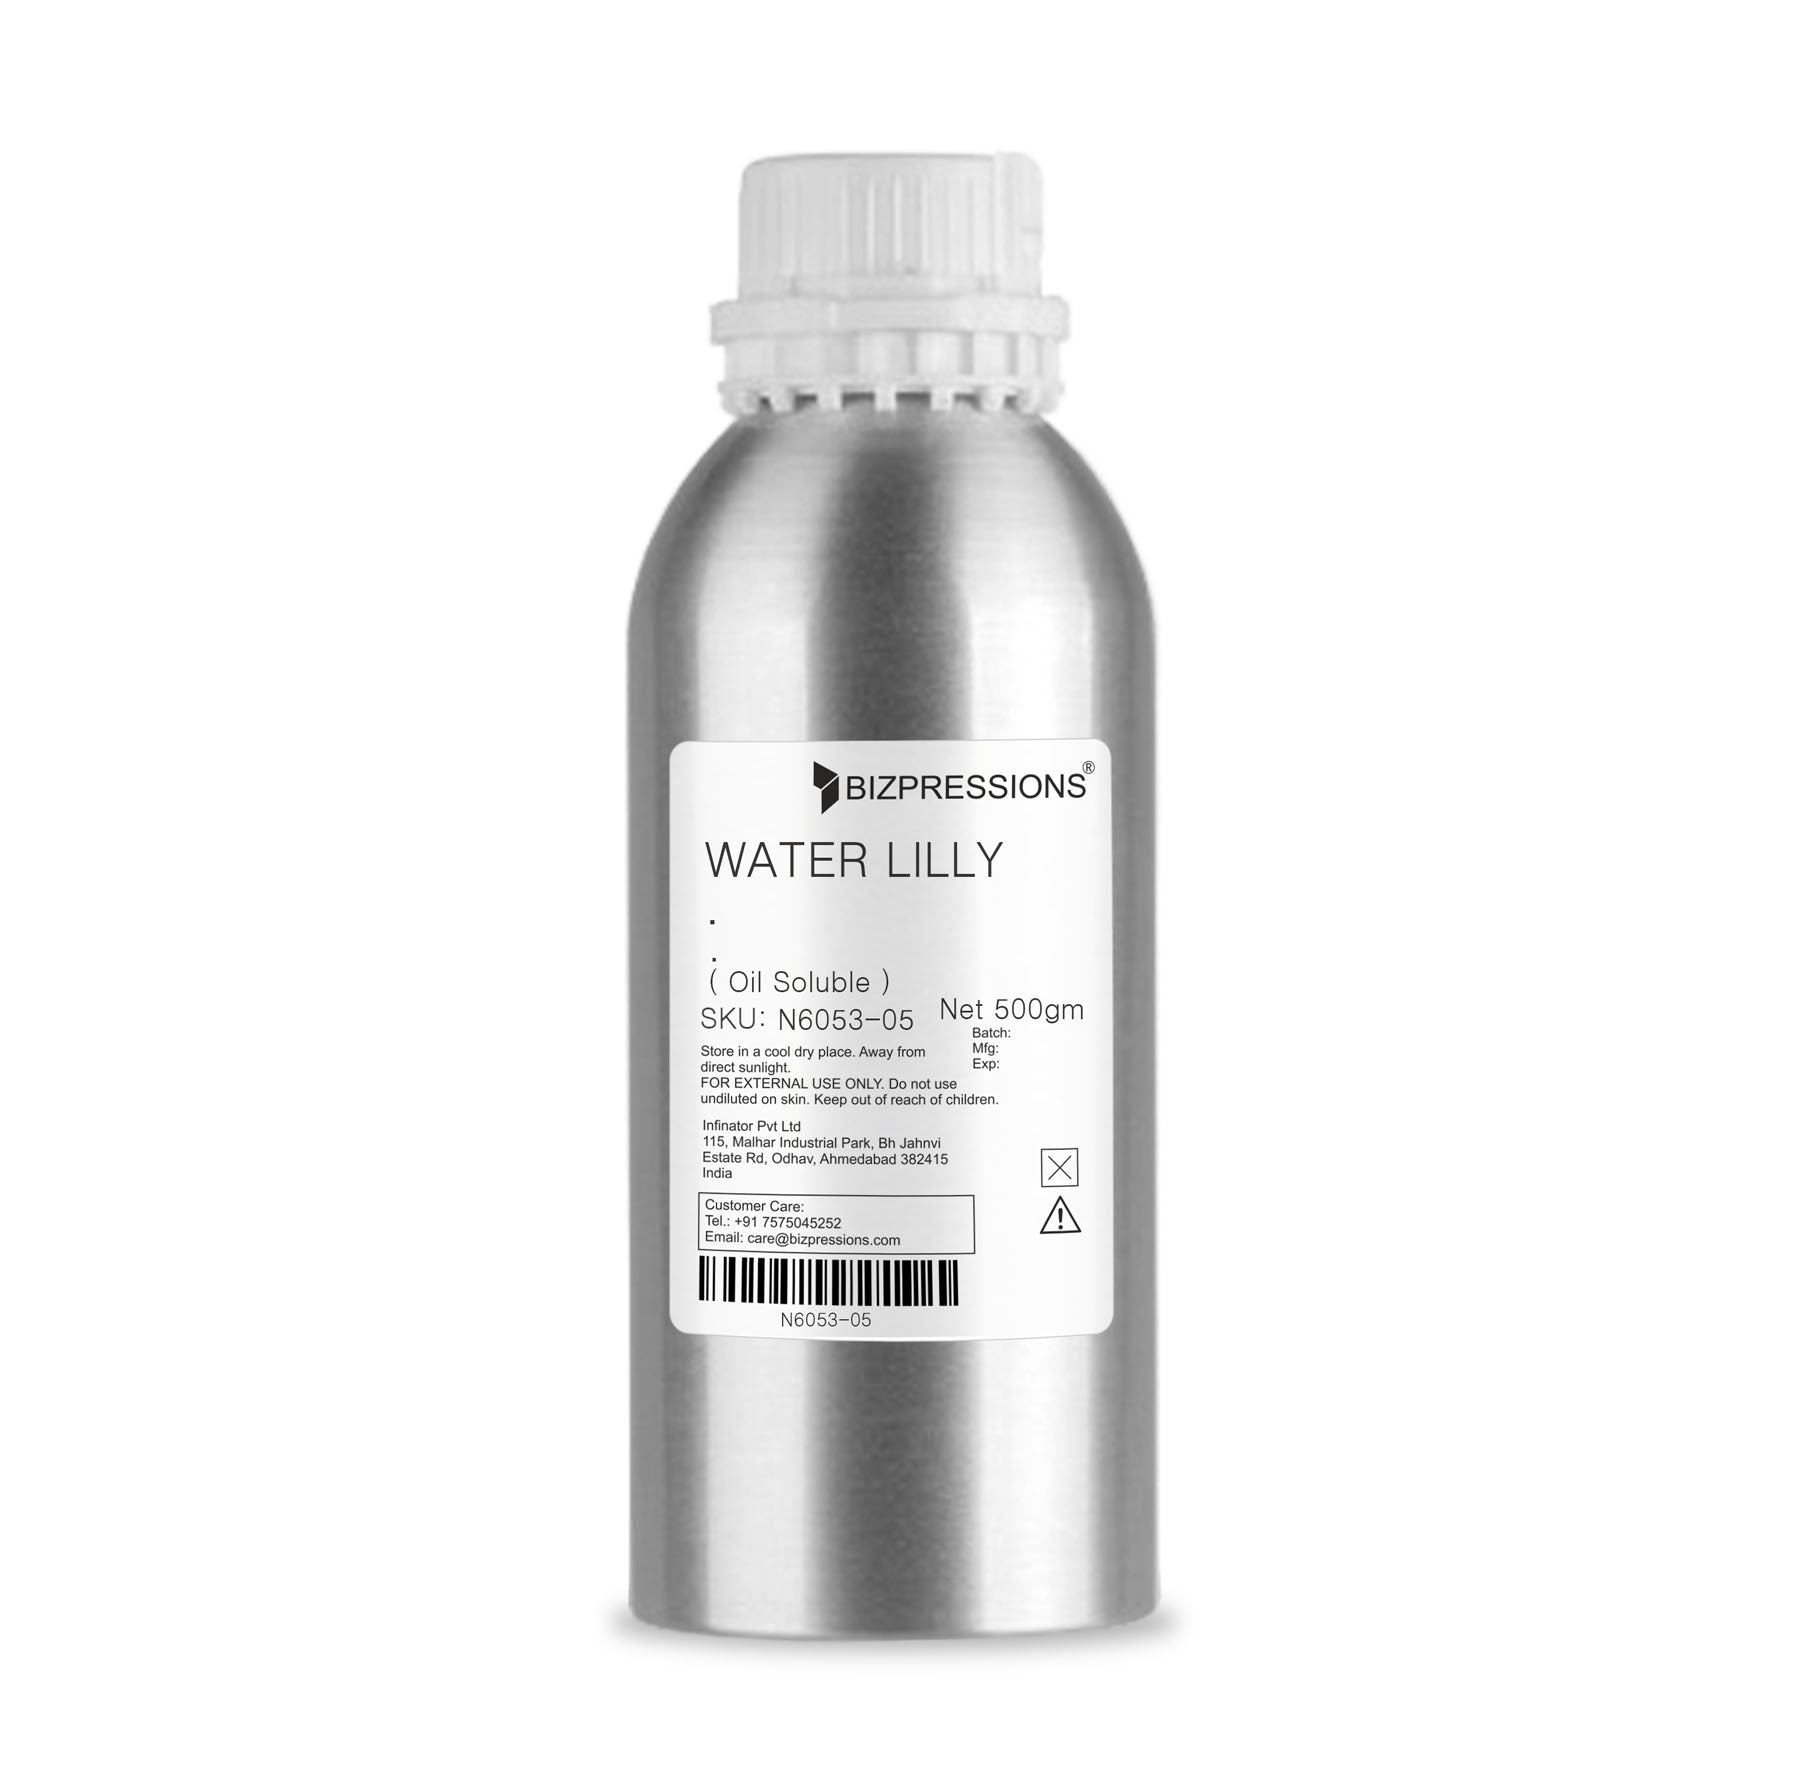 WATER LILLY - Fragrance ( Oil Soluble ) - 500 gm